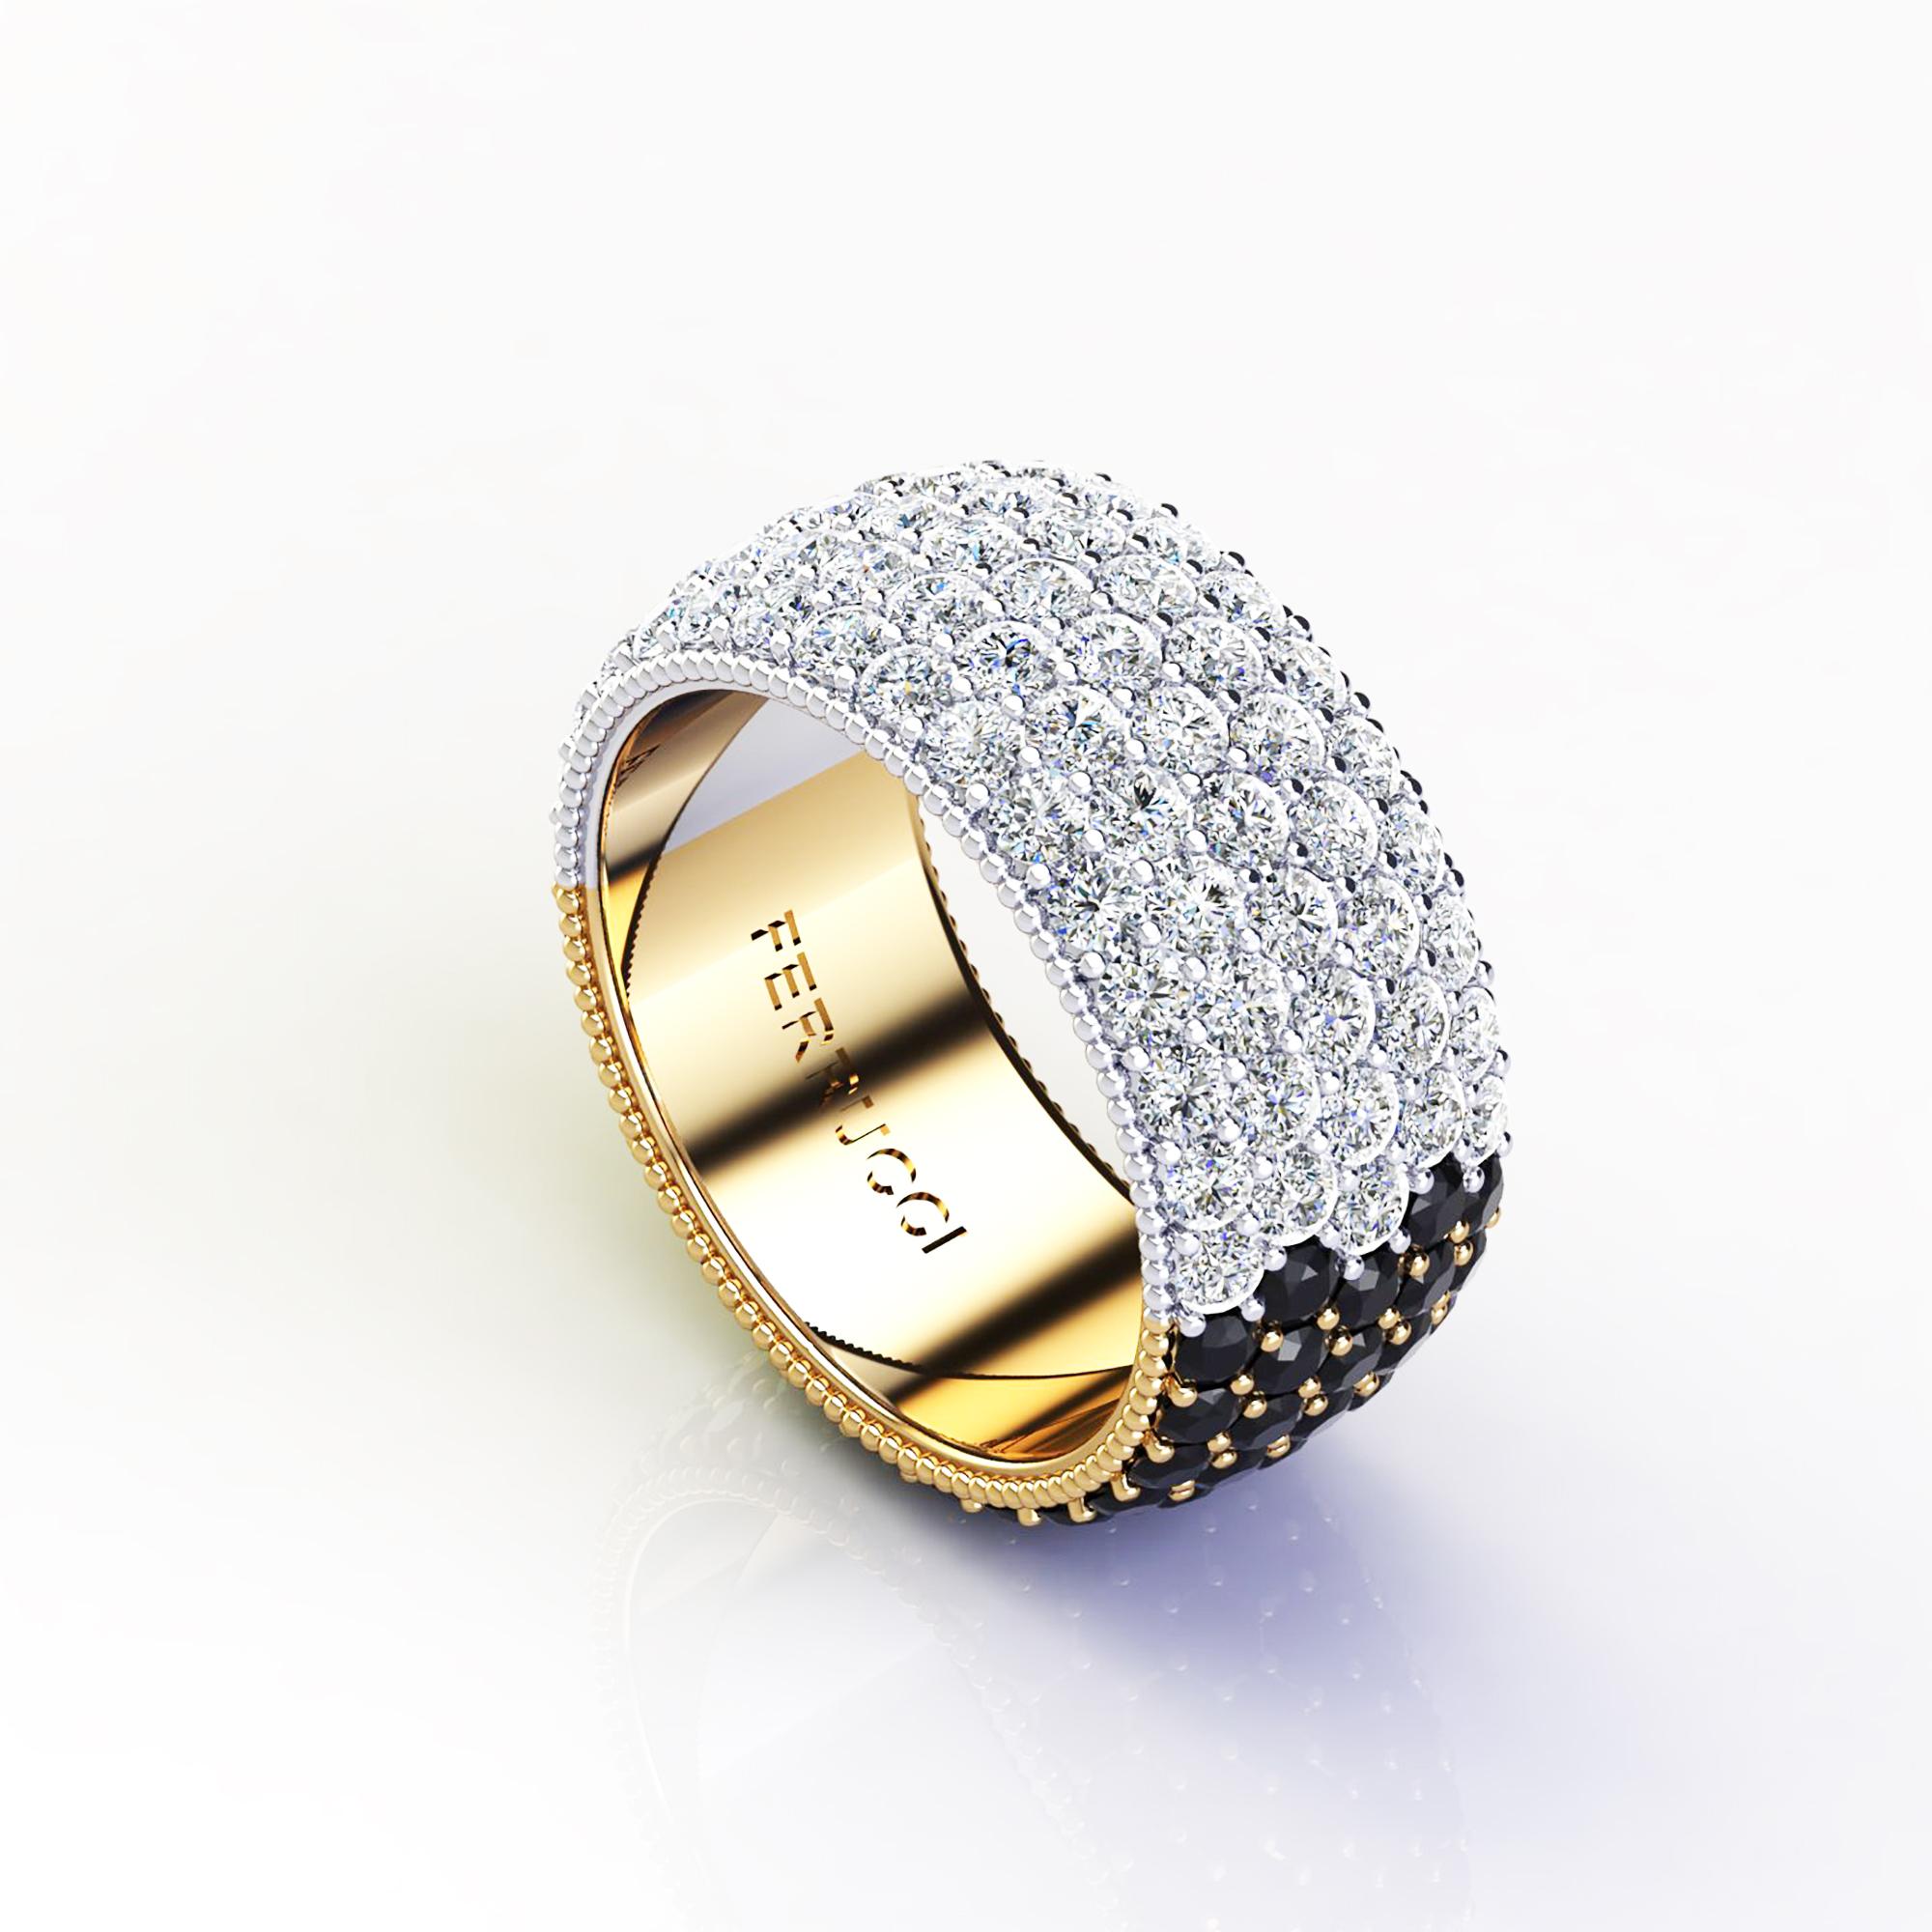 FERRUCCI Wide diamond pave' ring, with a slightly dome feeling, a wrap of sparkling white diamonds and black diamonds, for an approximate total carat weight of 4.50 carats, hand made in New York City by hand by  Italian master jeweler, conceived in